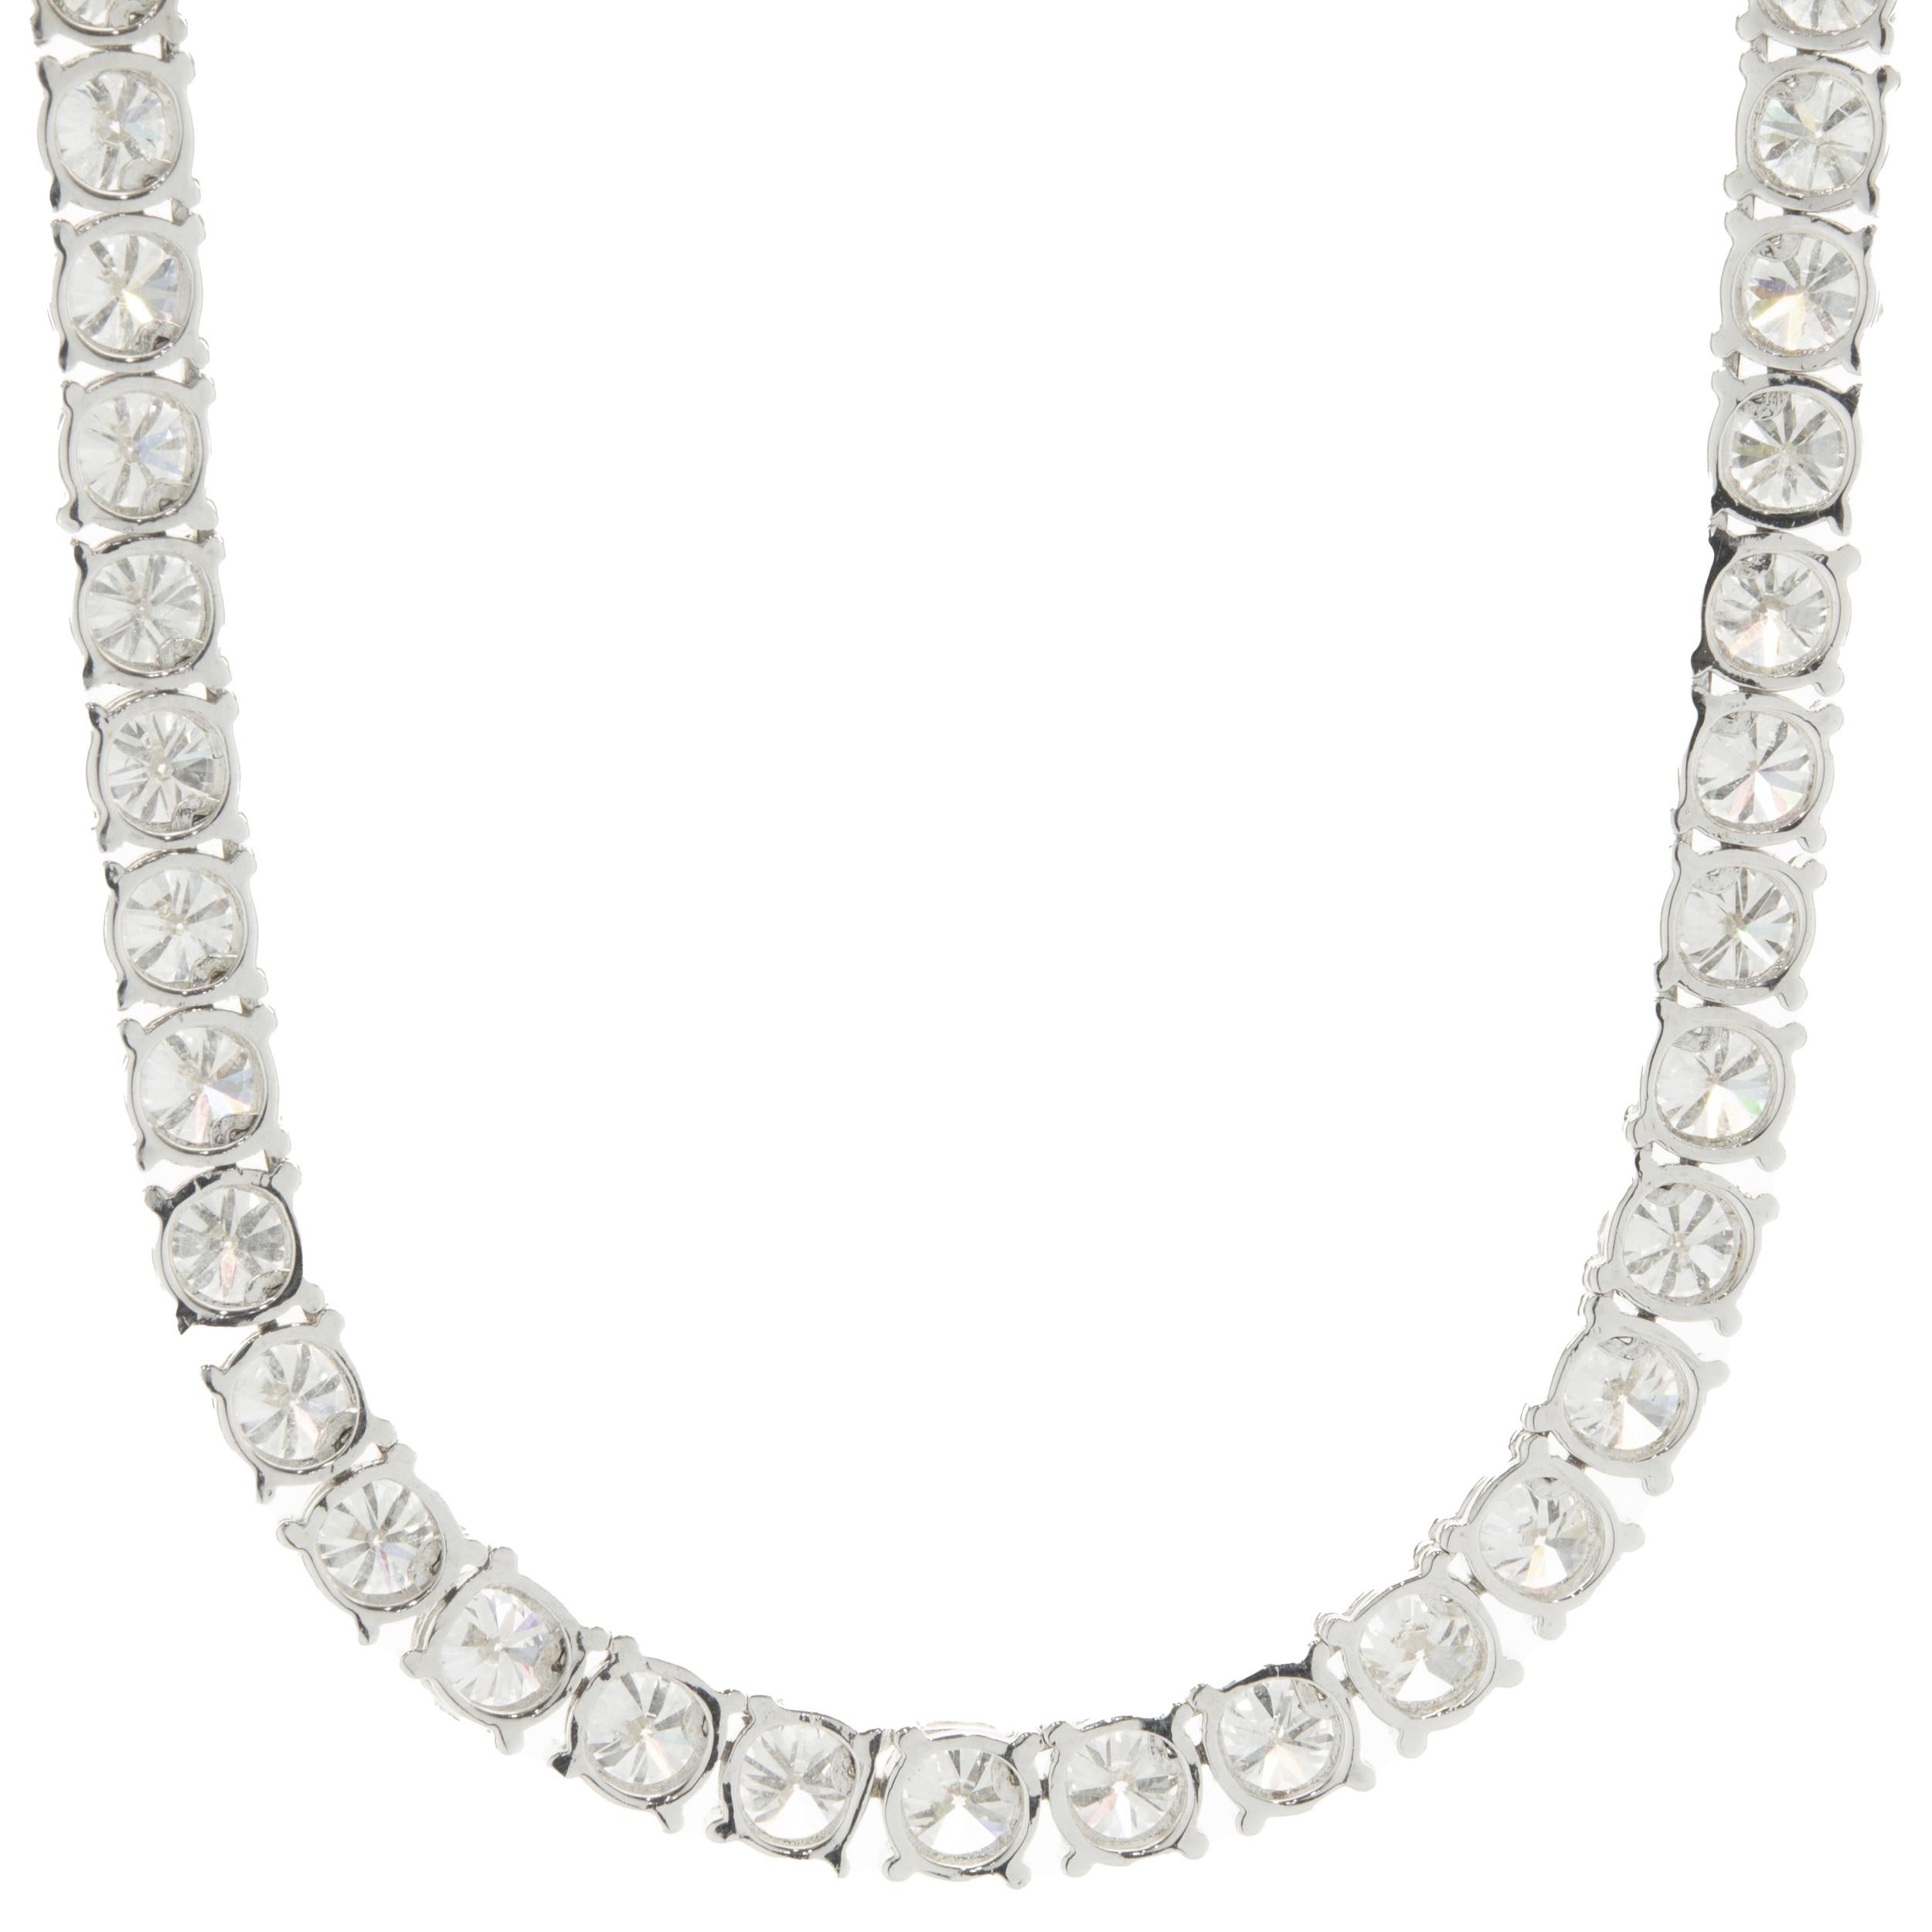 Designer: custom design
Material: 14K white gold
Diamonds: 118 round brilliant cut = 24.45cttw
Color: F
Clarity: VS1-2
Dimensions: necklace measures 18-inches in length 
Weight: 21.44 grams